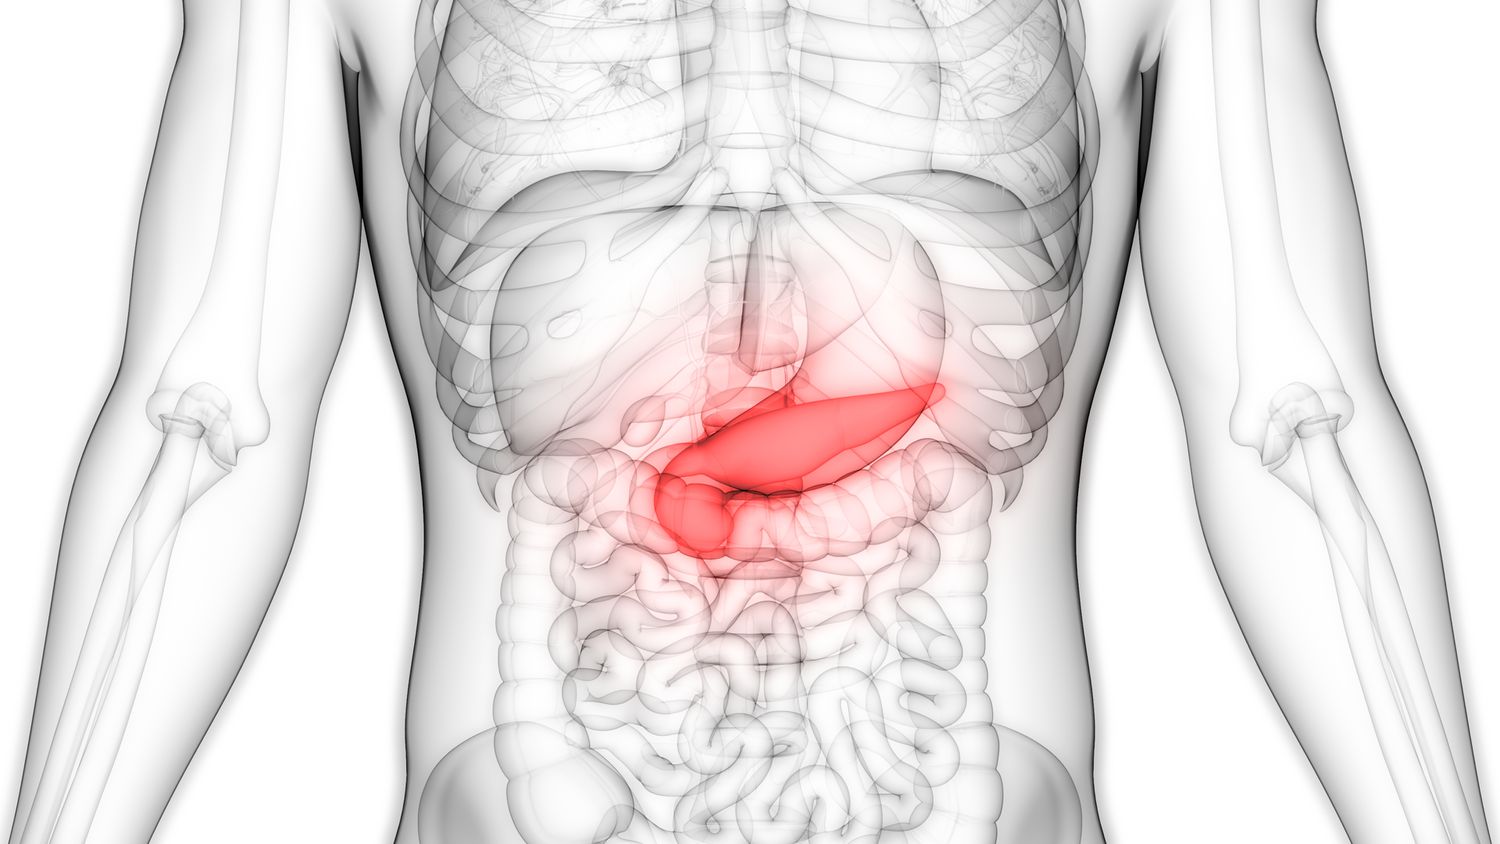 Pancreas- Anatomy, Functions and Conditions